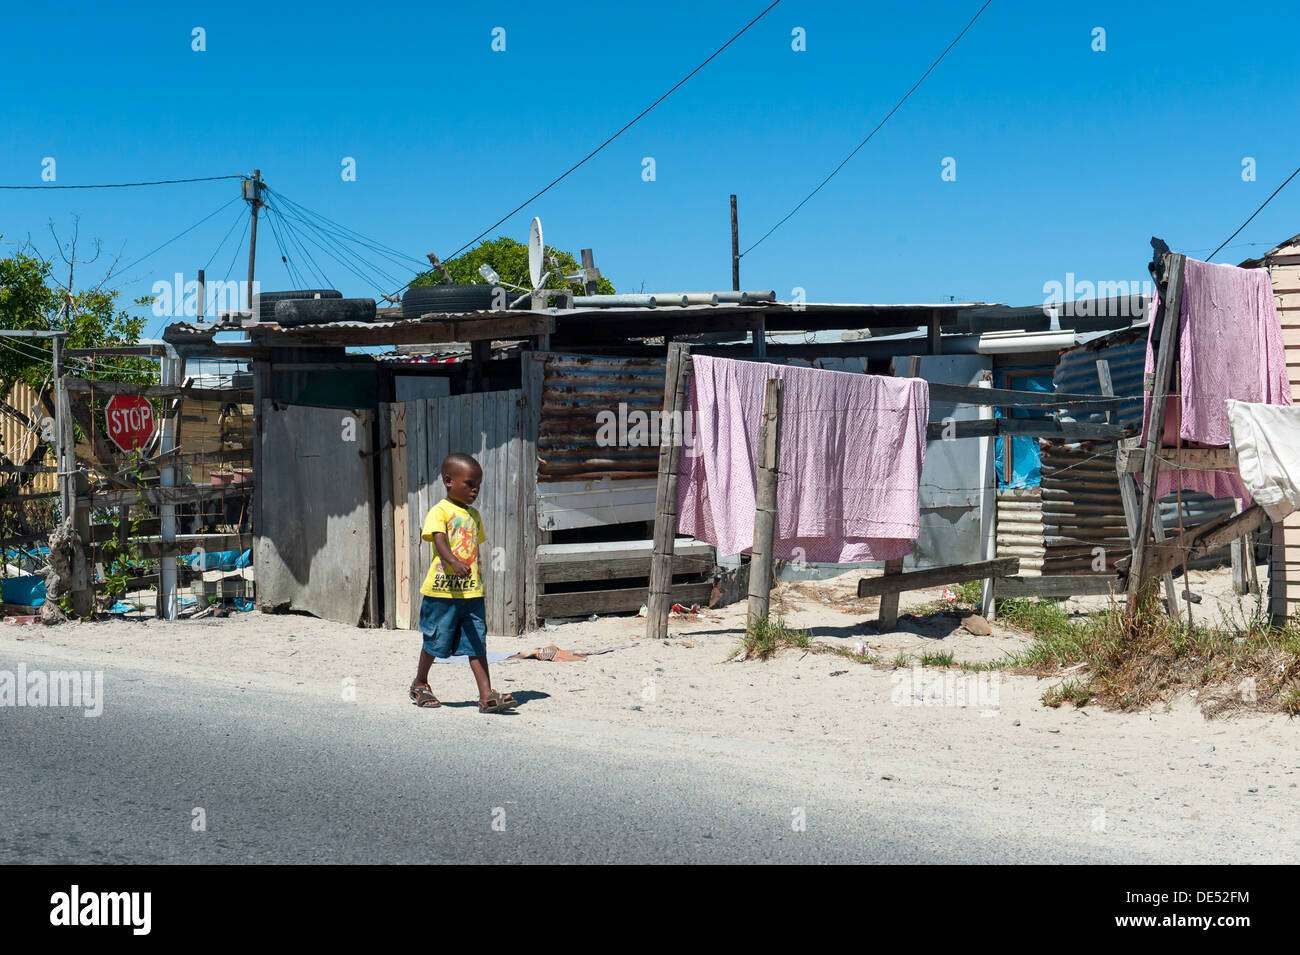 A child walking along a road in Khayelitsha, a partially informal township in Cape Town, Western Cape, South Africa Stock Photo